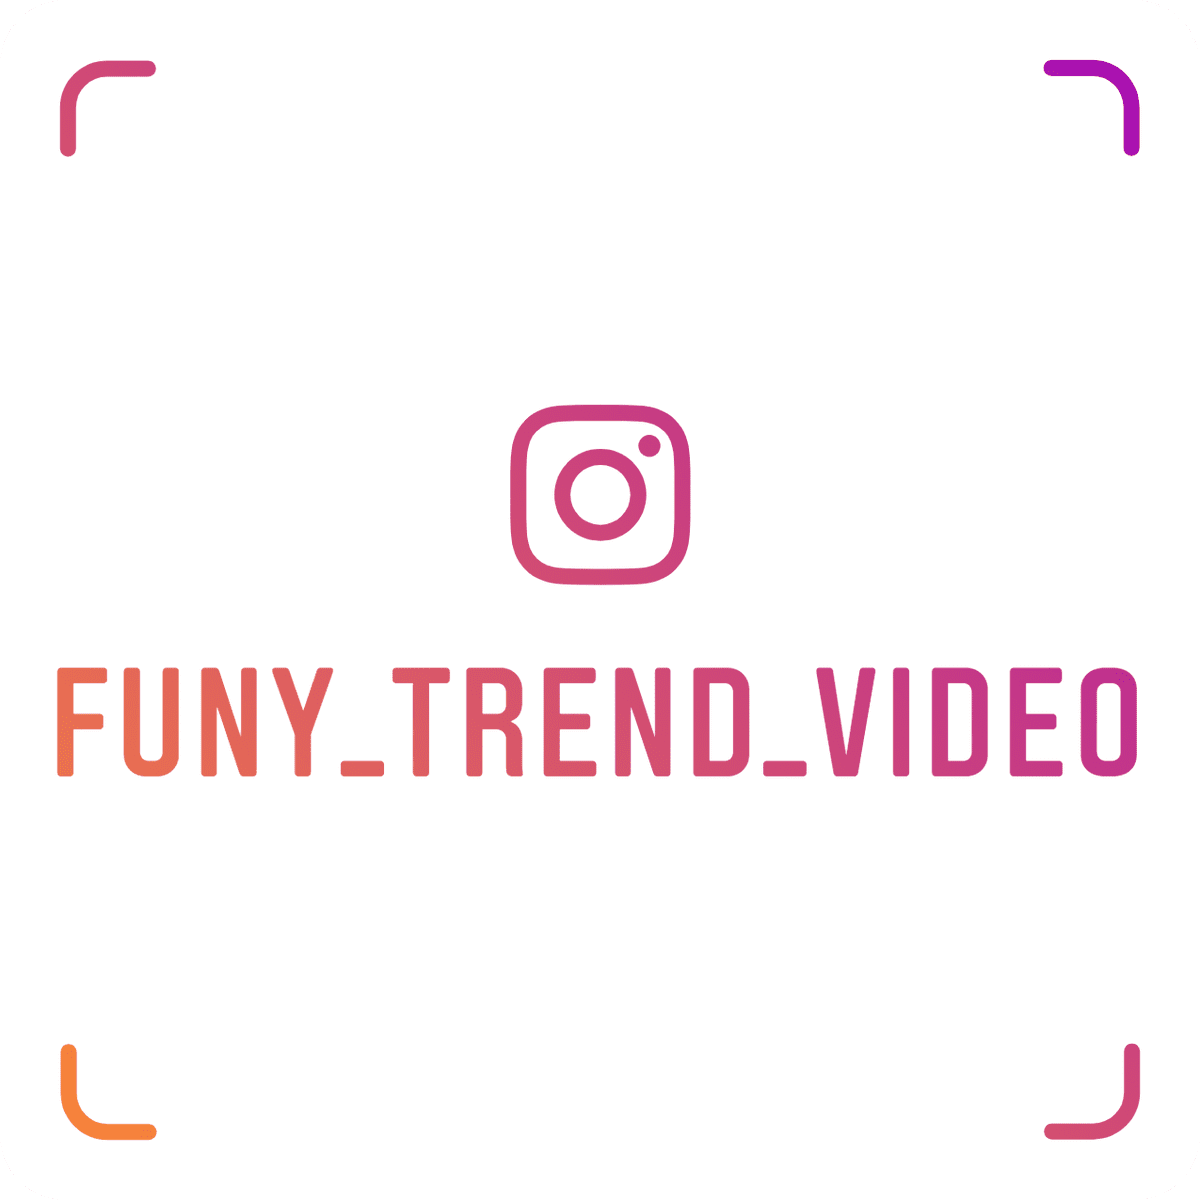 funy_trend_video_nametag